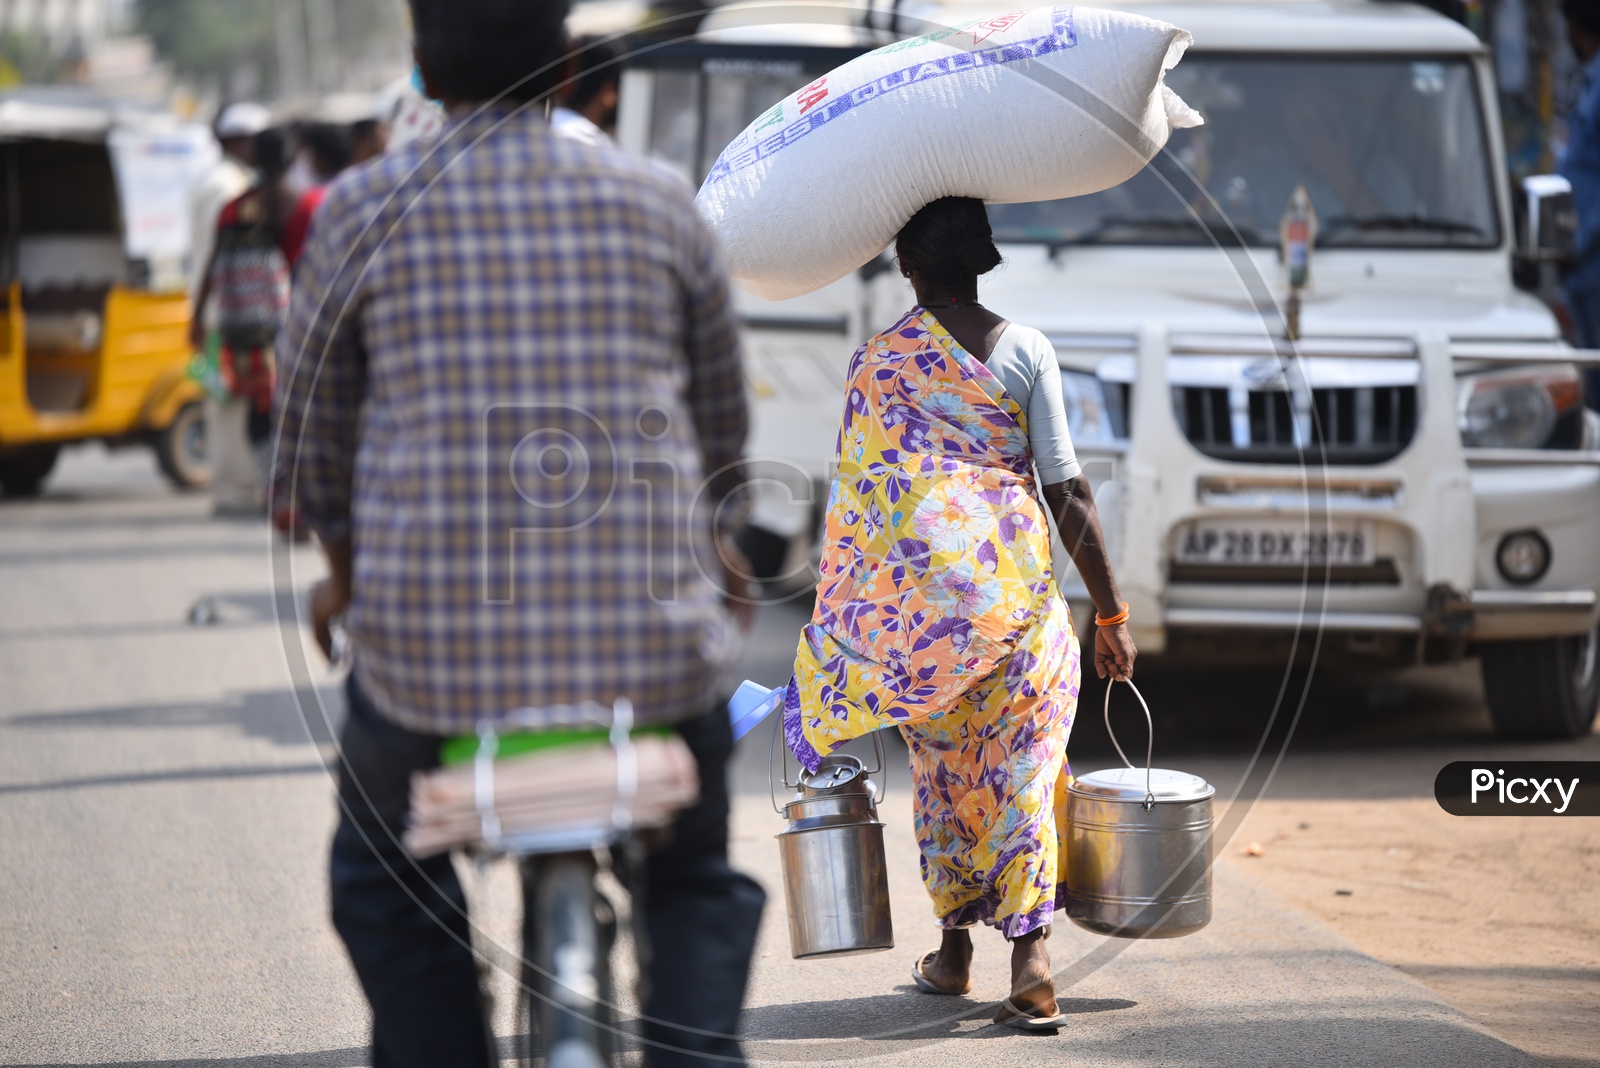 A Woman Carrying Heavy Weight on her Head and Steel Carriers in Hand Walking Along a Road As a Part Of her Daily Routine